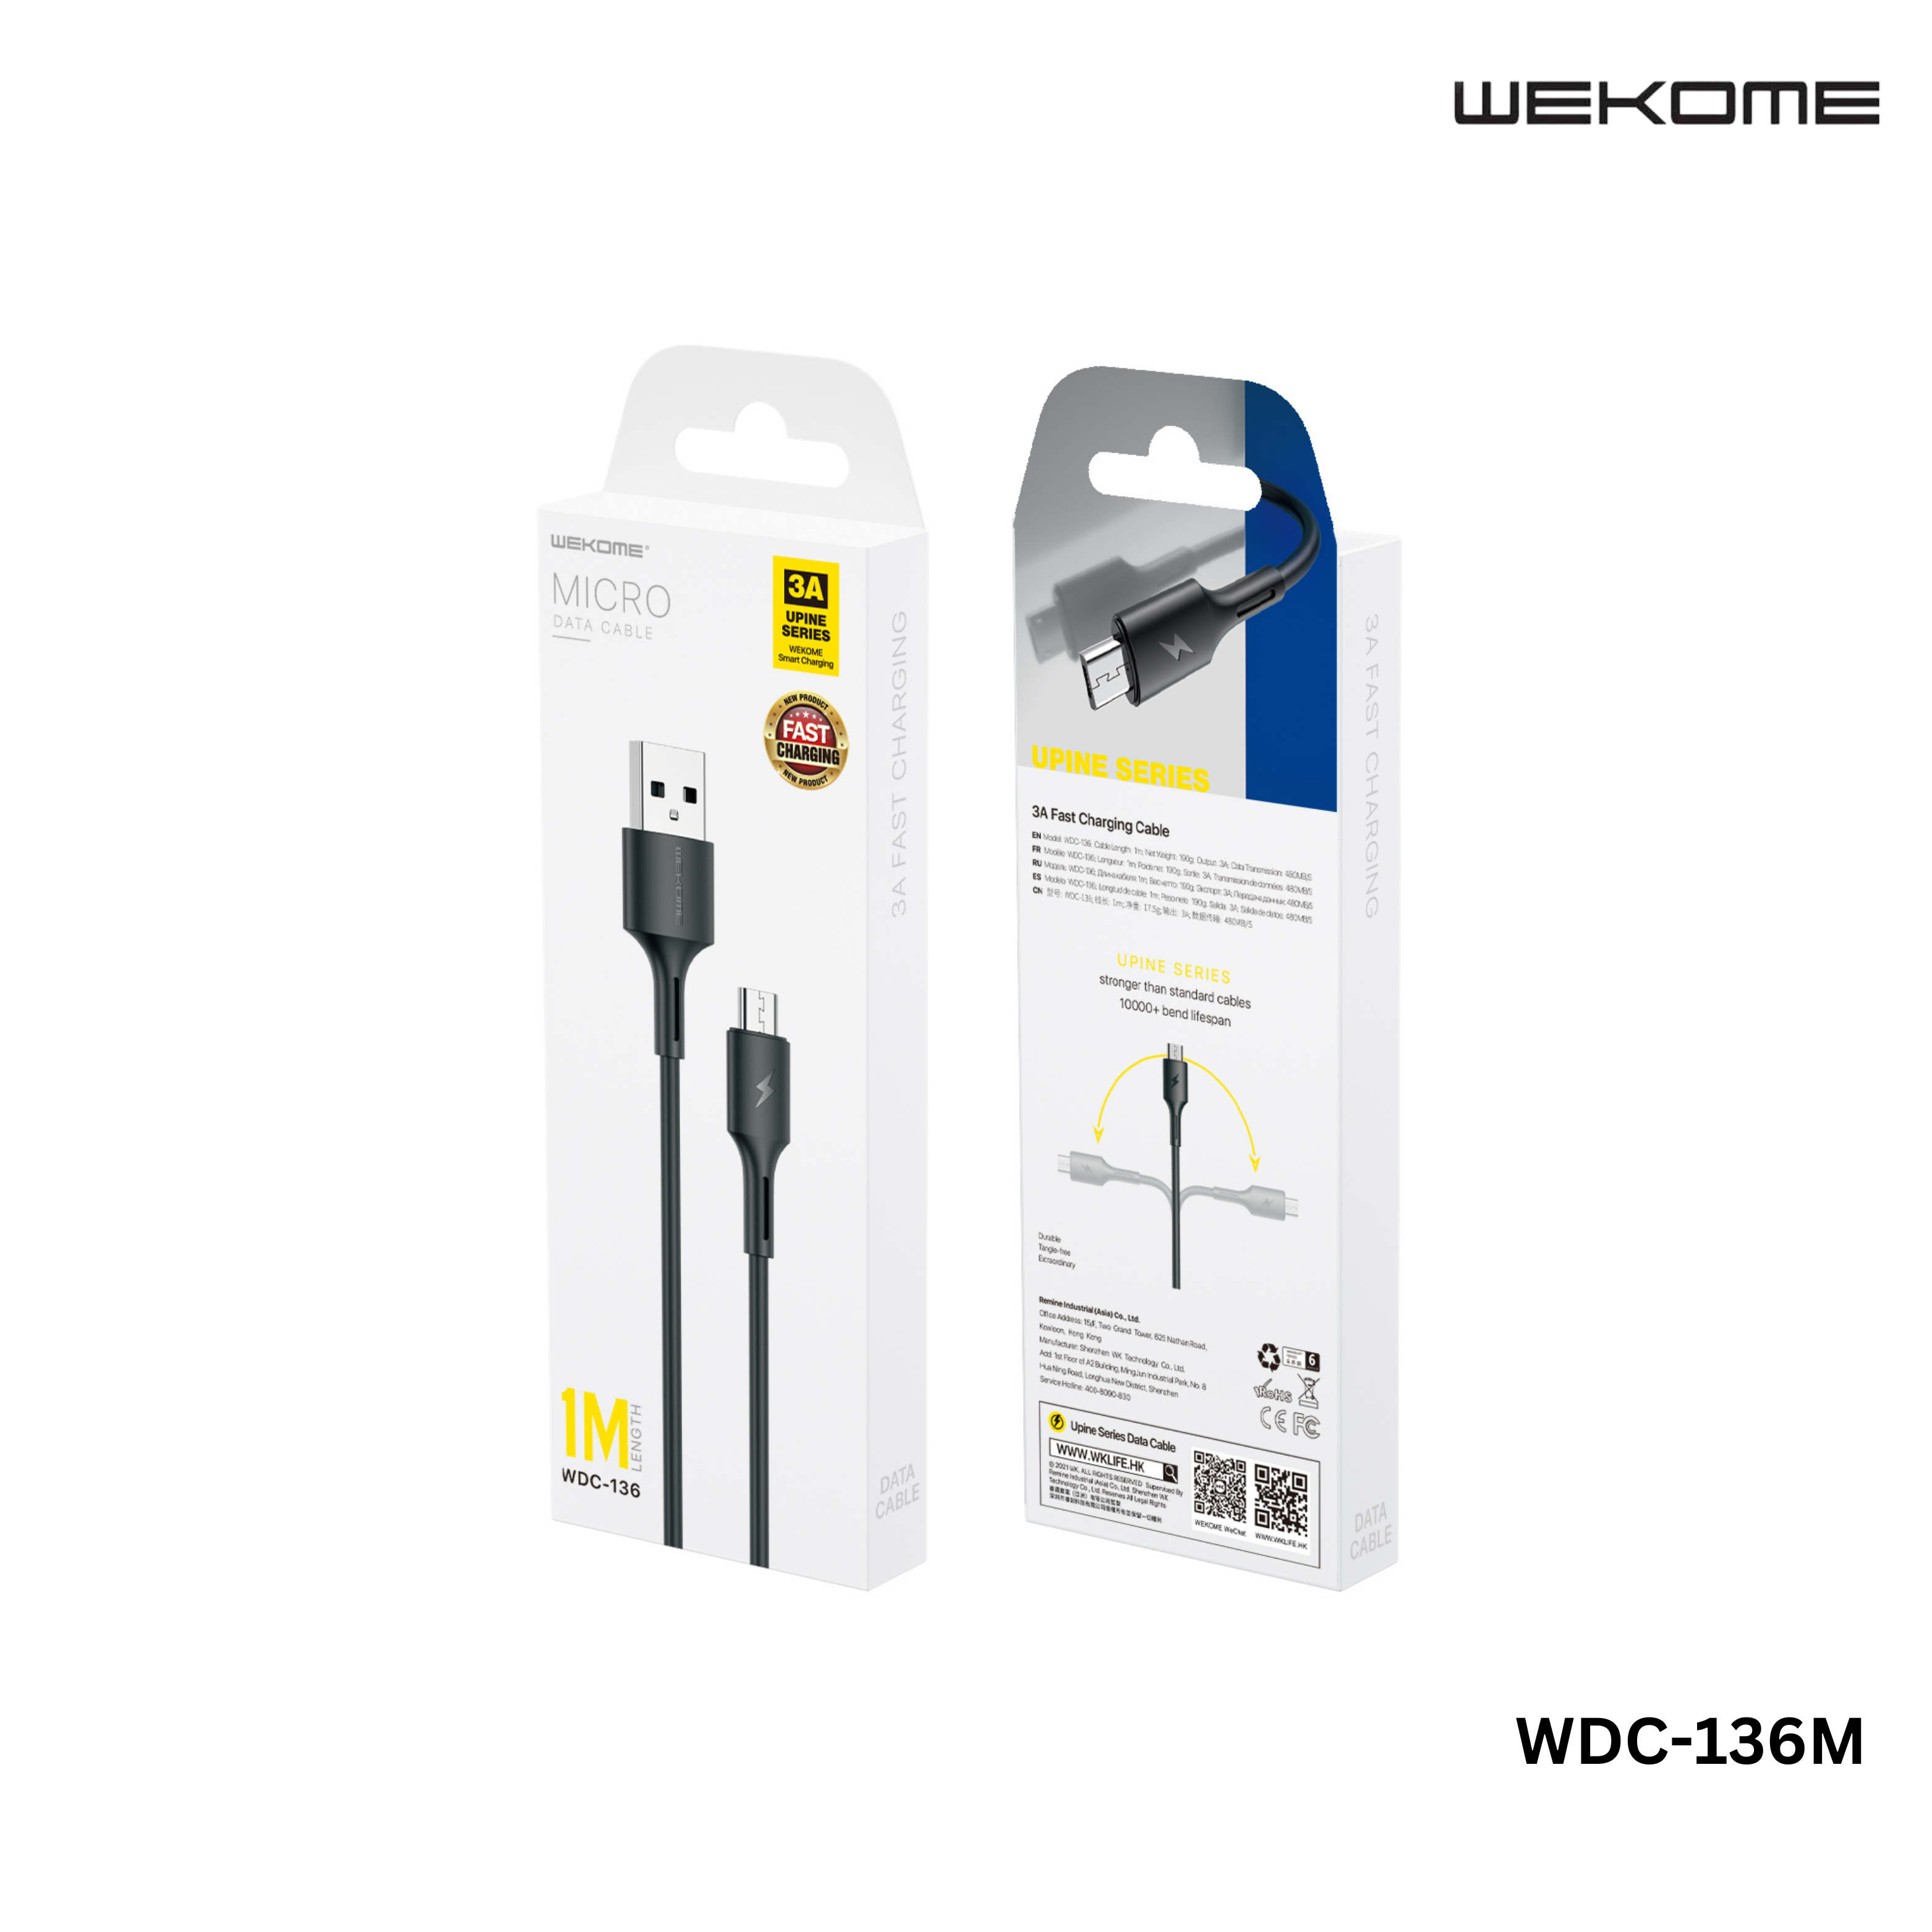 WEKOME Micro Cable (WDC-136M) YOUPIN SERIES 3A DATA CABLE FOR MICRO (1M) (3A), Android Cable, Charging Cable, Android Charging Cable-Black